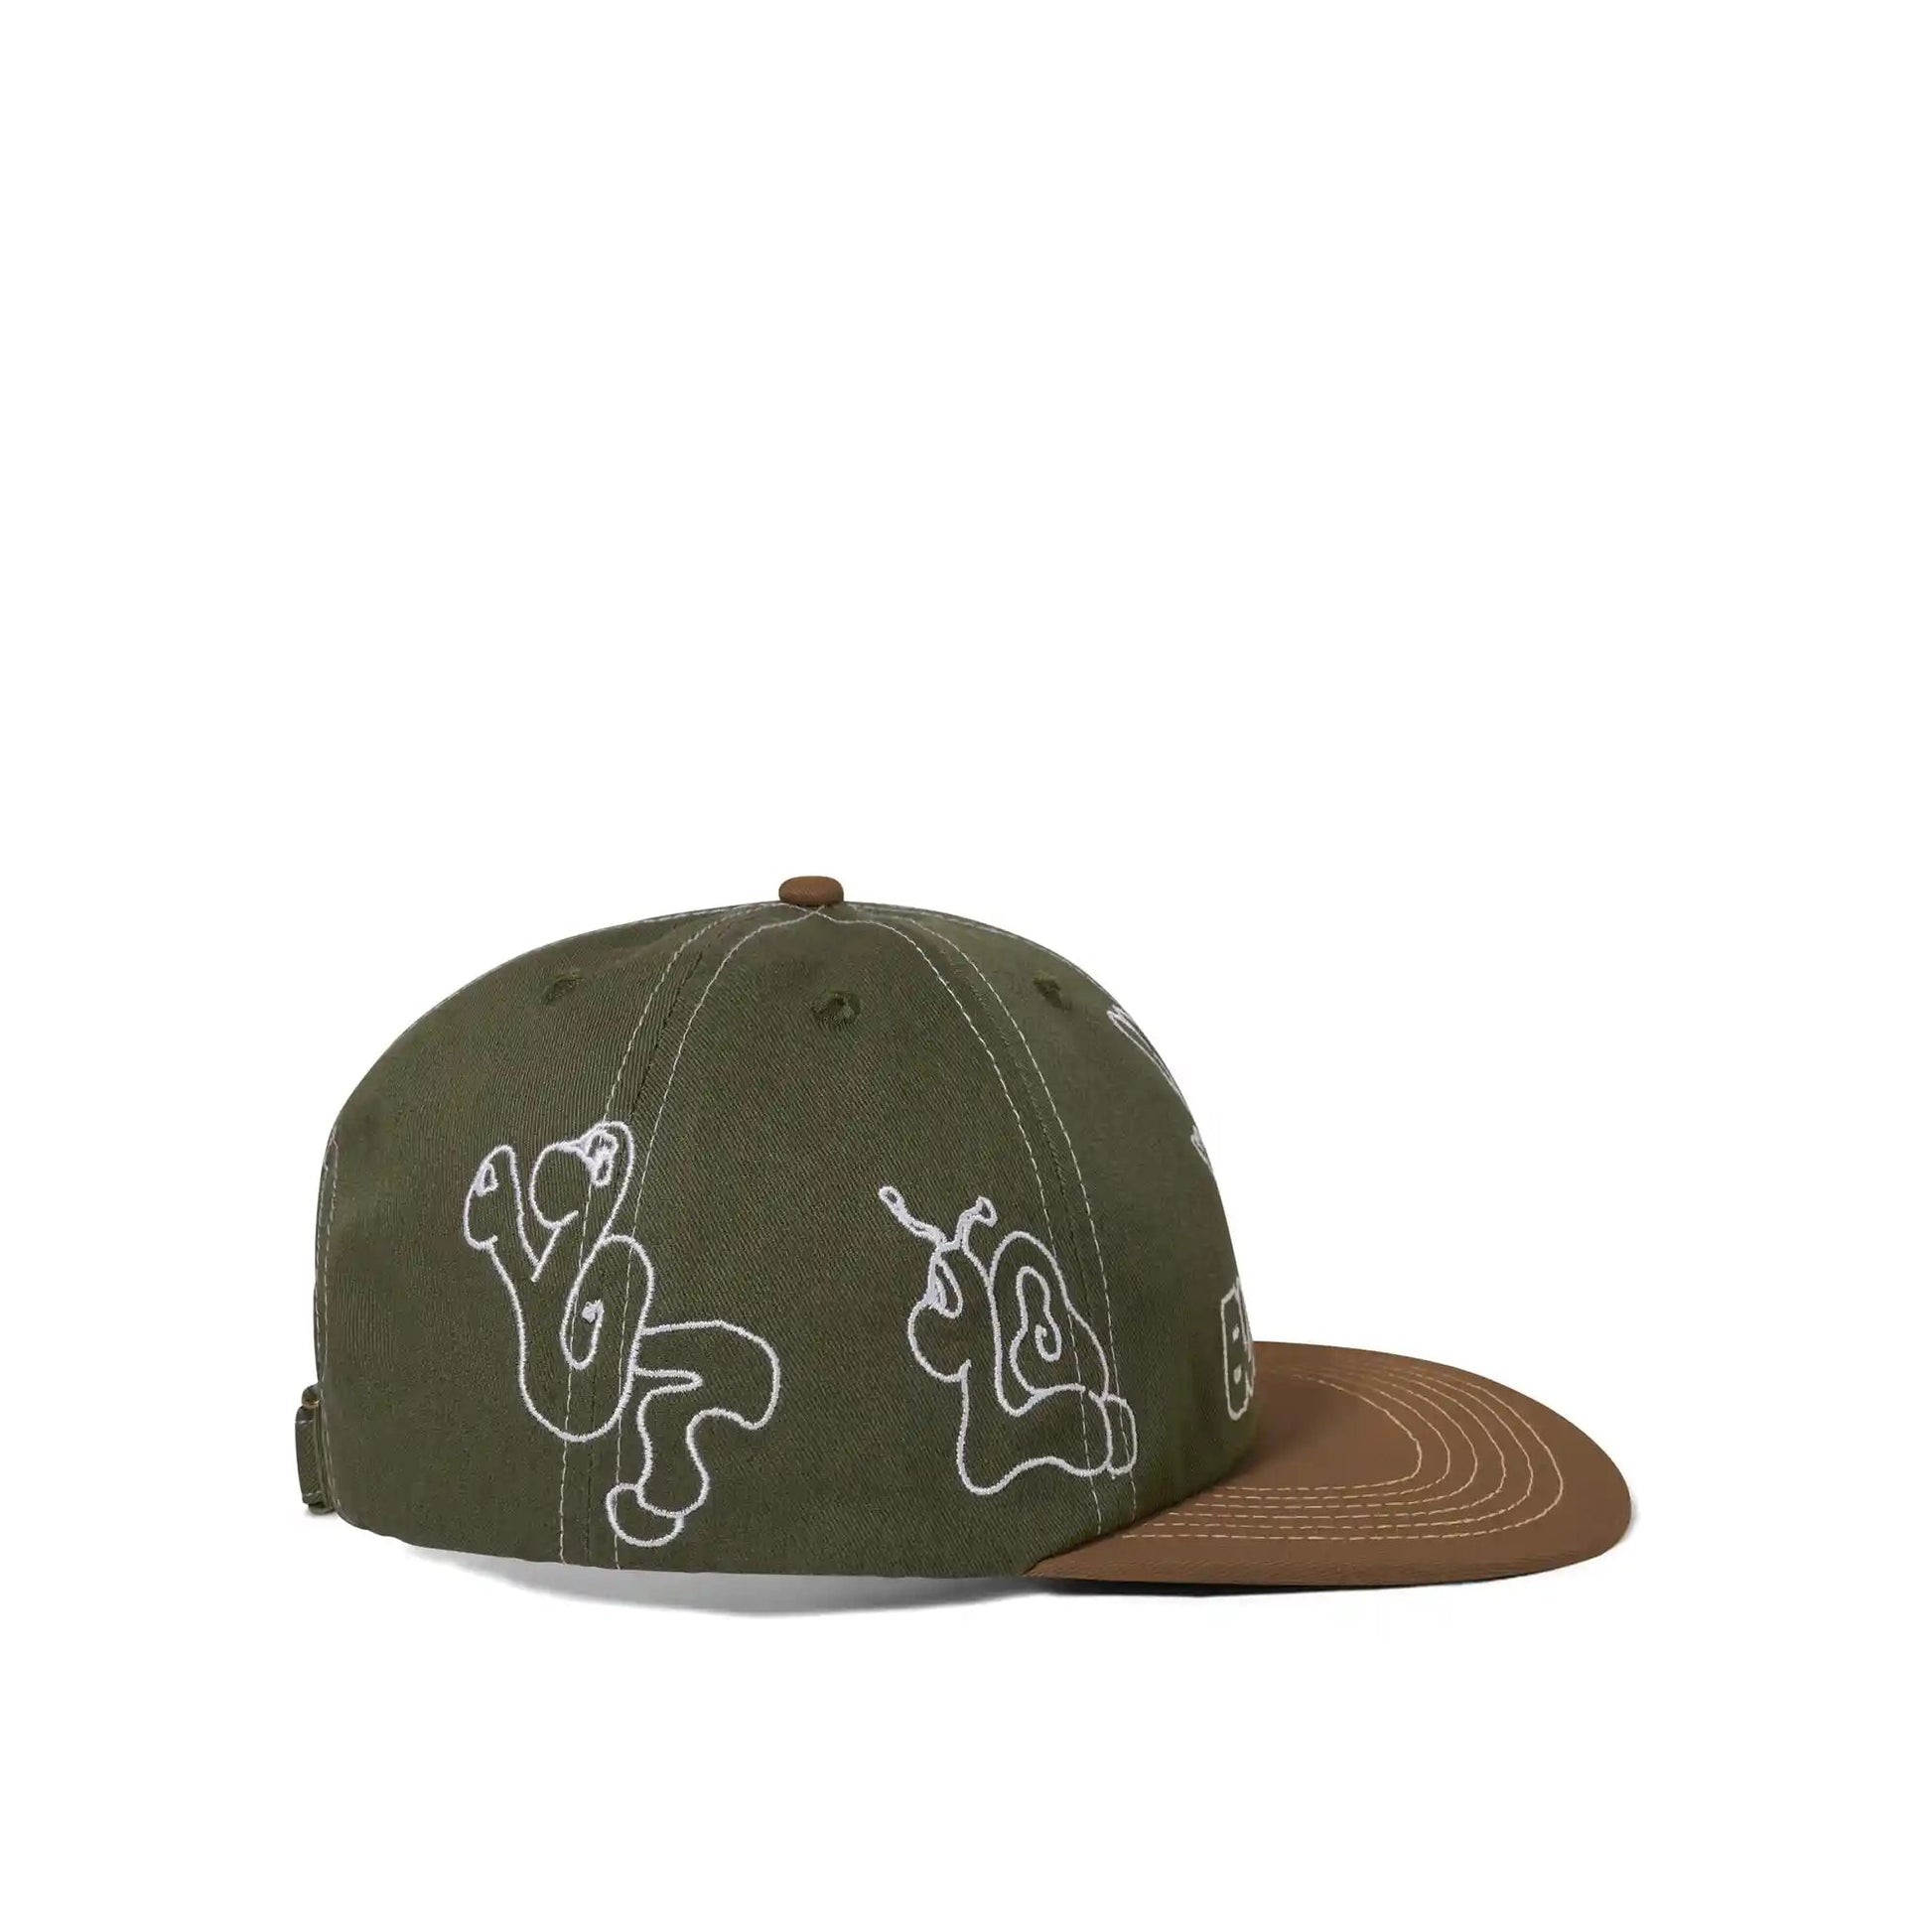 Butter Goods Critter 6 Panel Cap, army / brown - Tiki Room Skateboards - 3